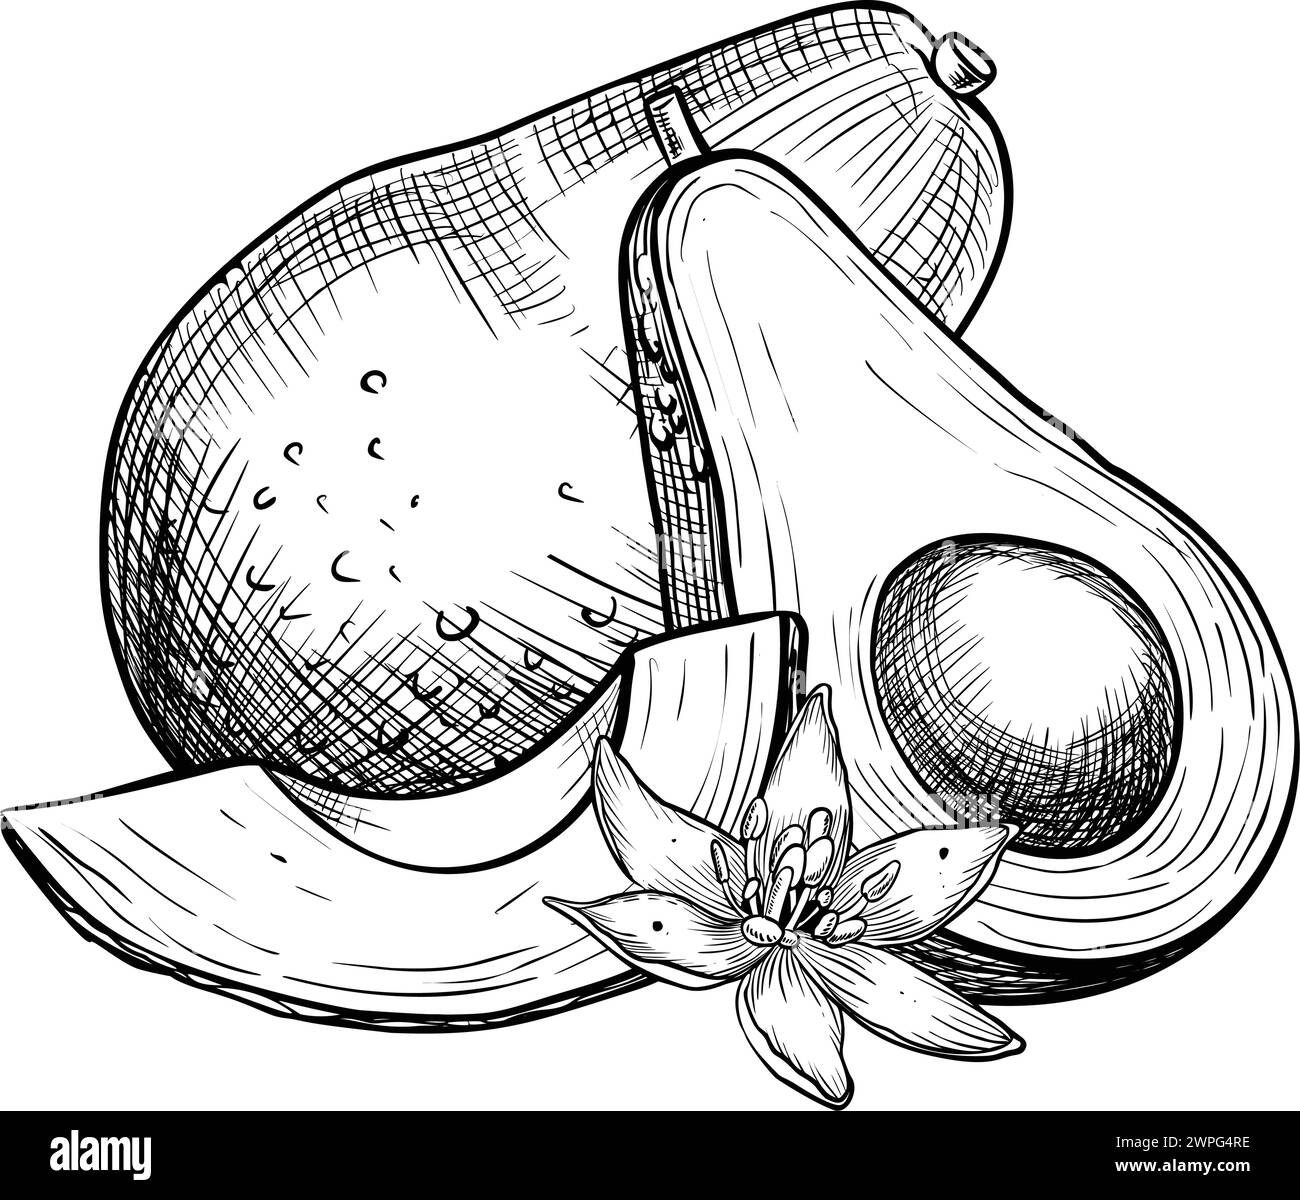 Avocado with flower vector illustration. Botanical drawing of Fruit. Vegetable sketch painting in linear style. Vegan organic ecological Food. Hand drawn sketch in black and white colors for logo. Stock Vector